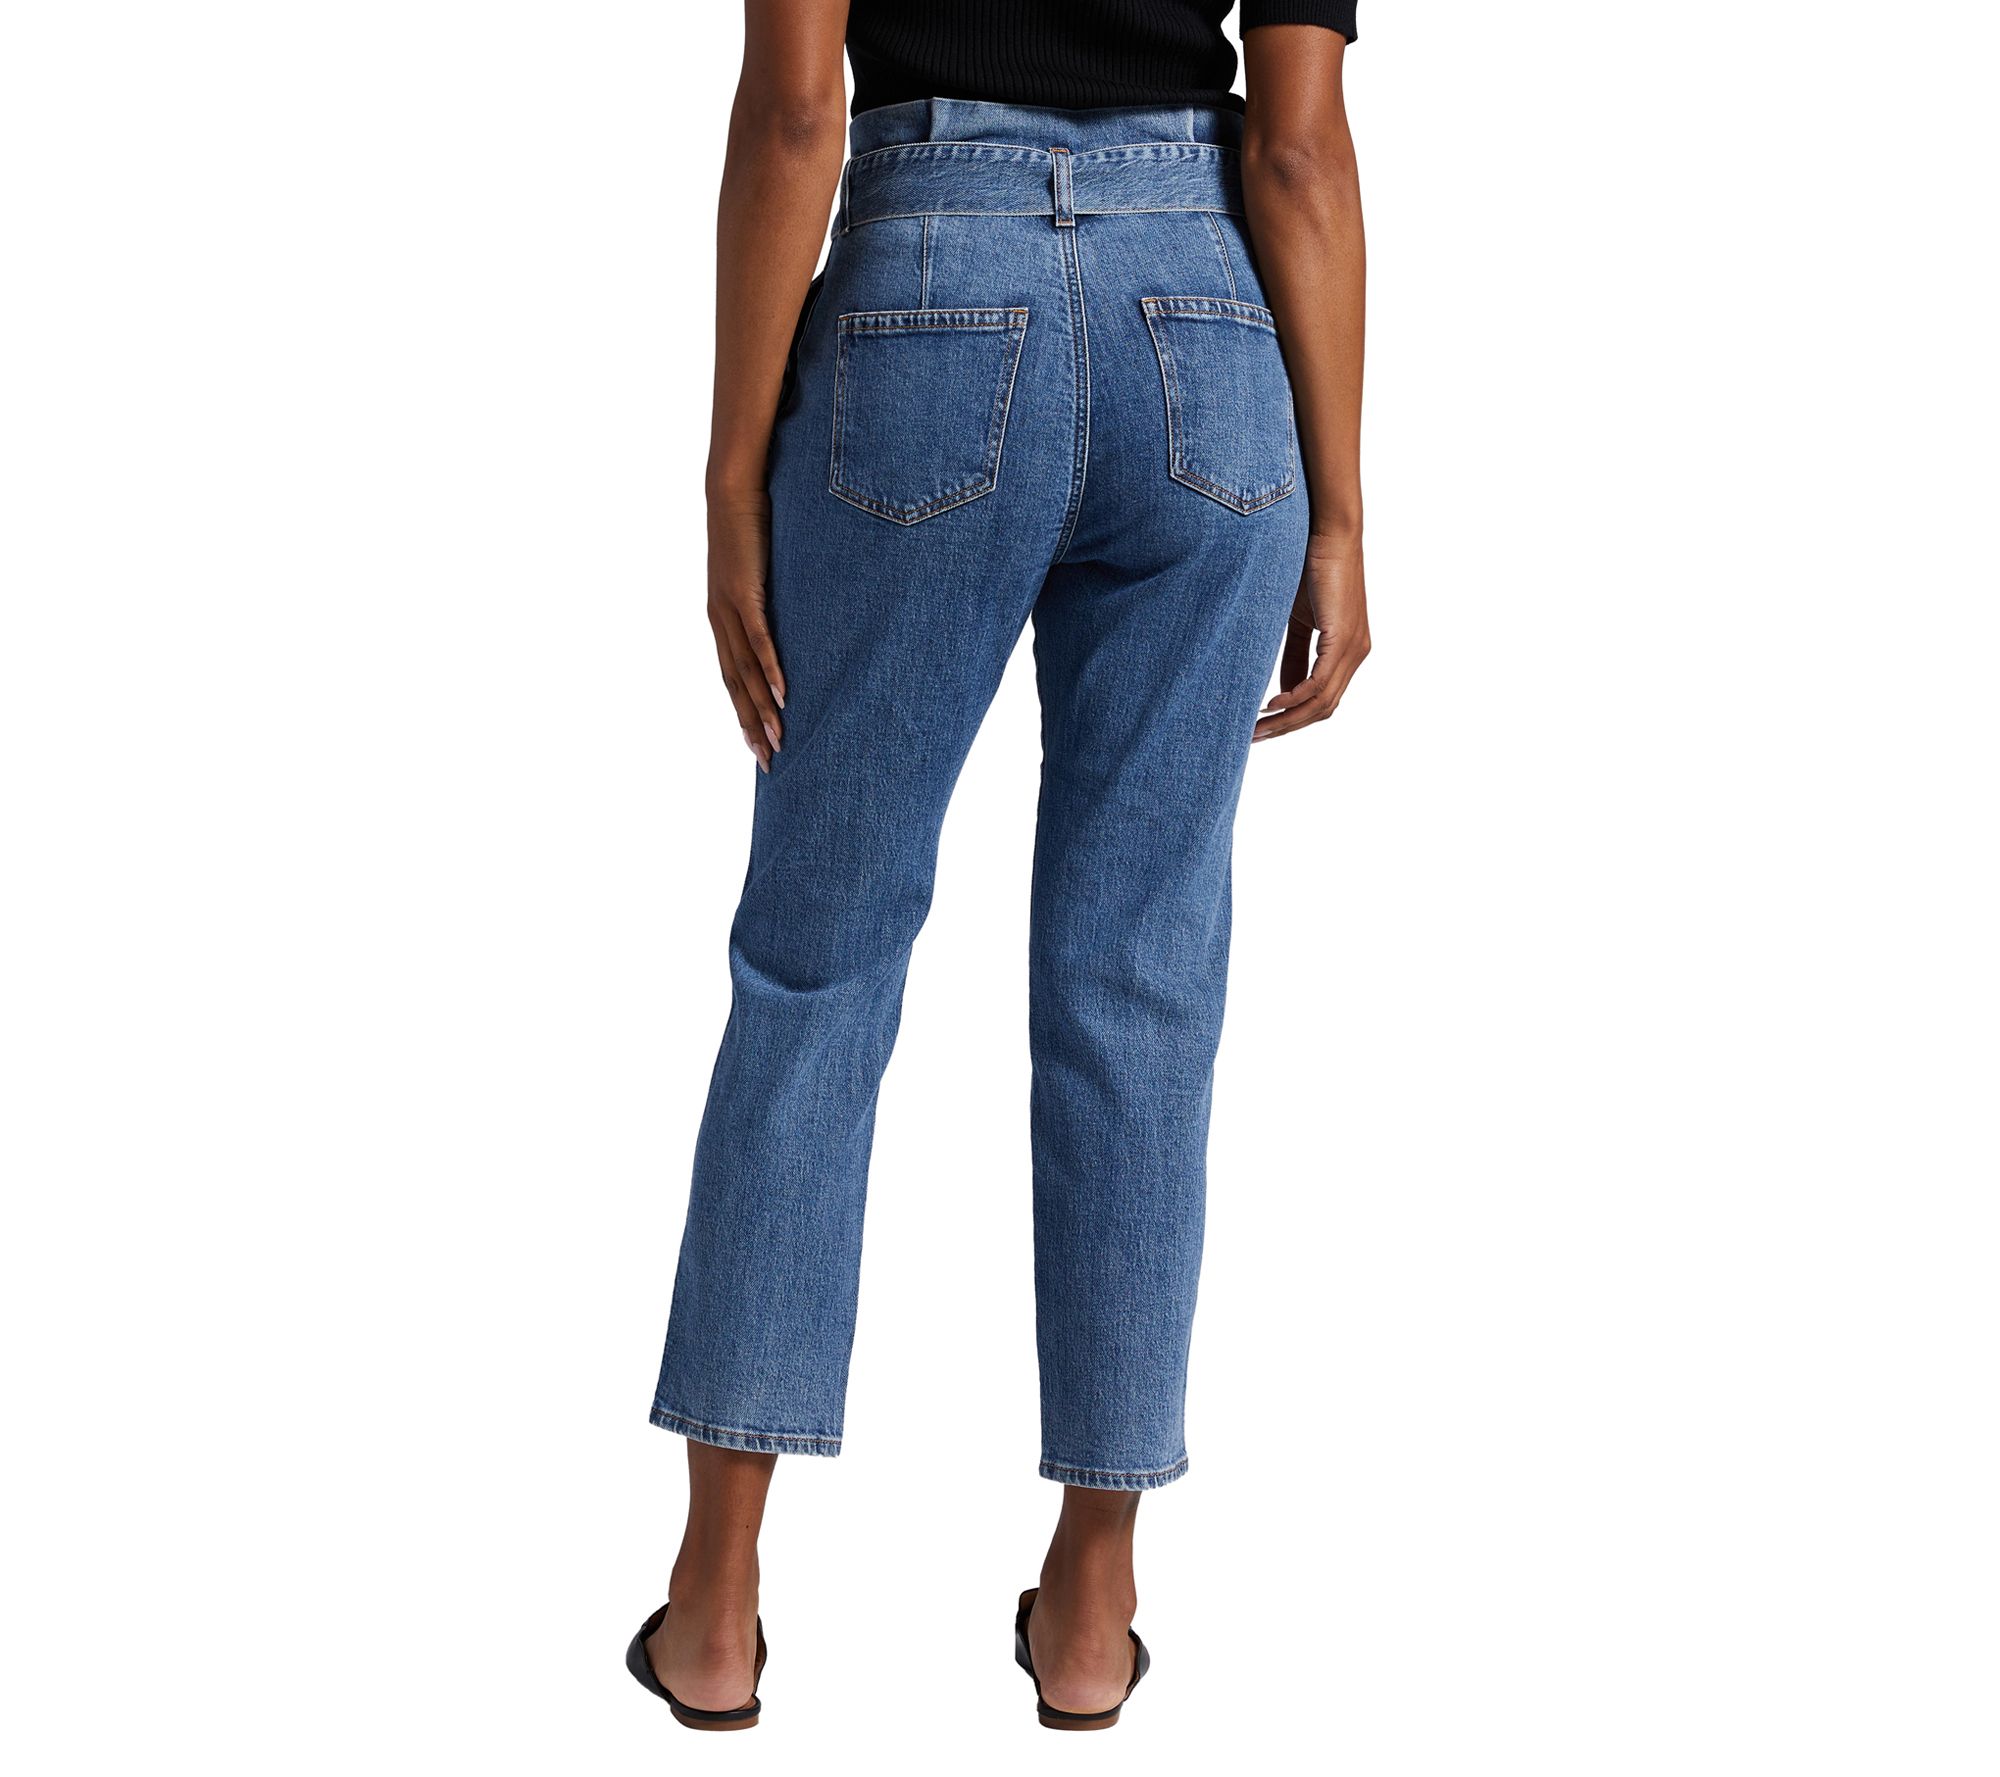 JAG Belted Pleat High Rise Tapered Leg Pant-Blue Cruise - QVC.com